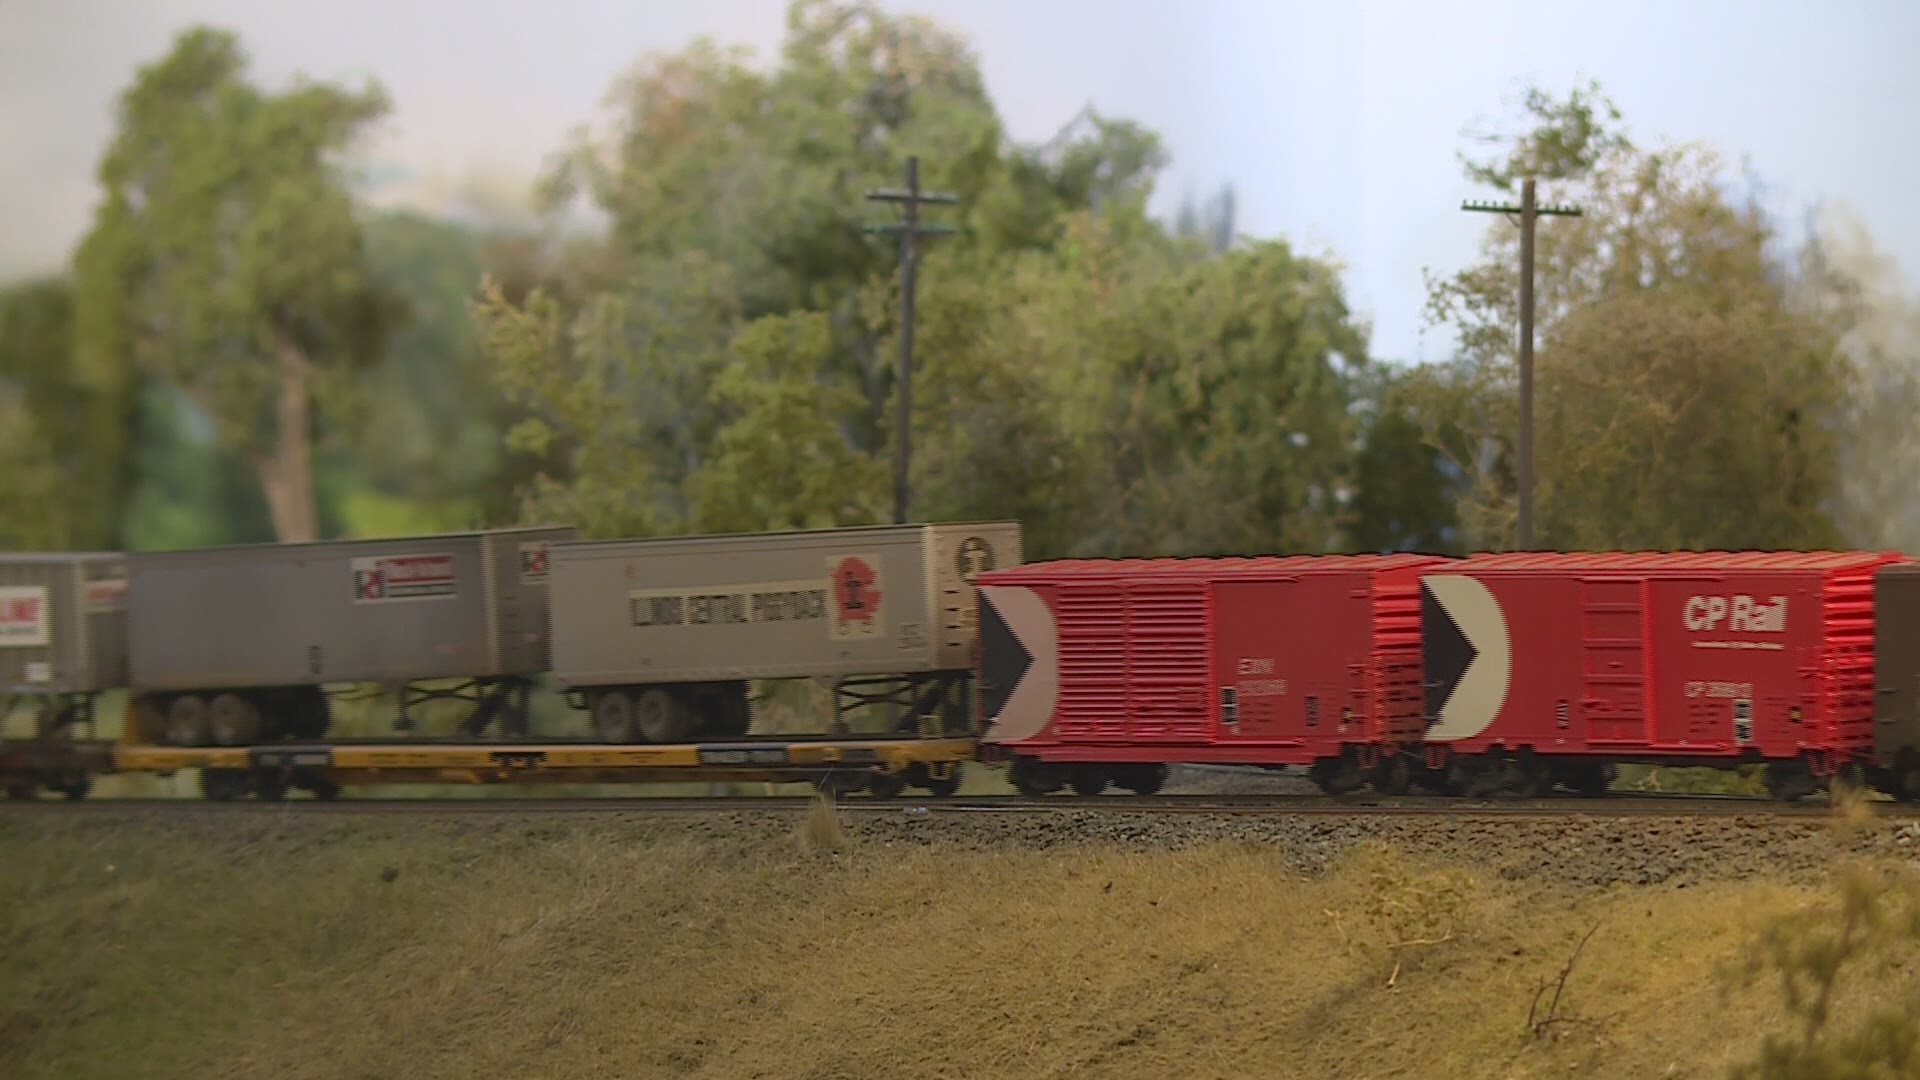 Hundreds of rail cars, engines, and landscapes he has created by hand.